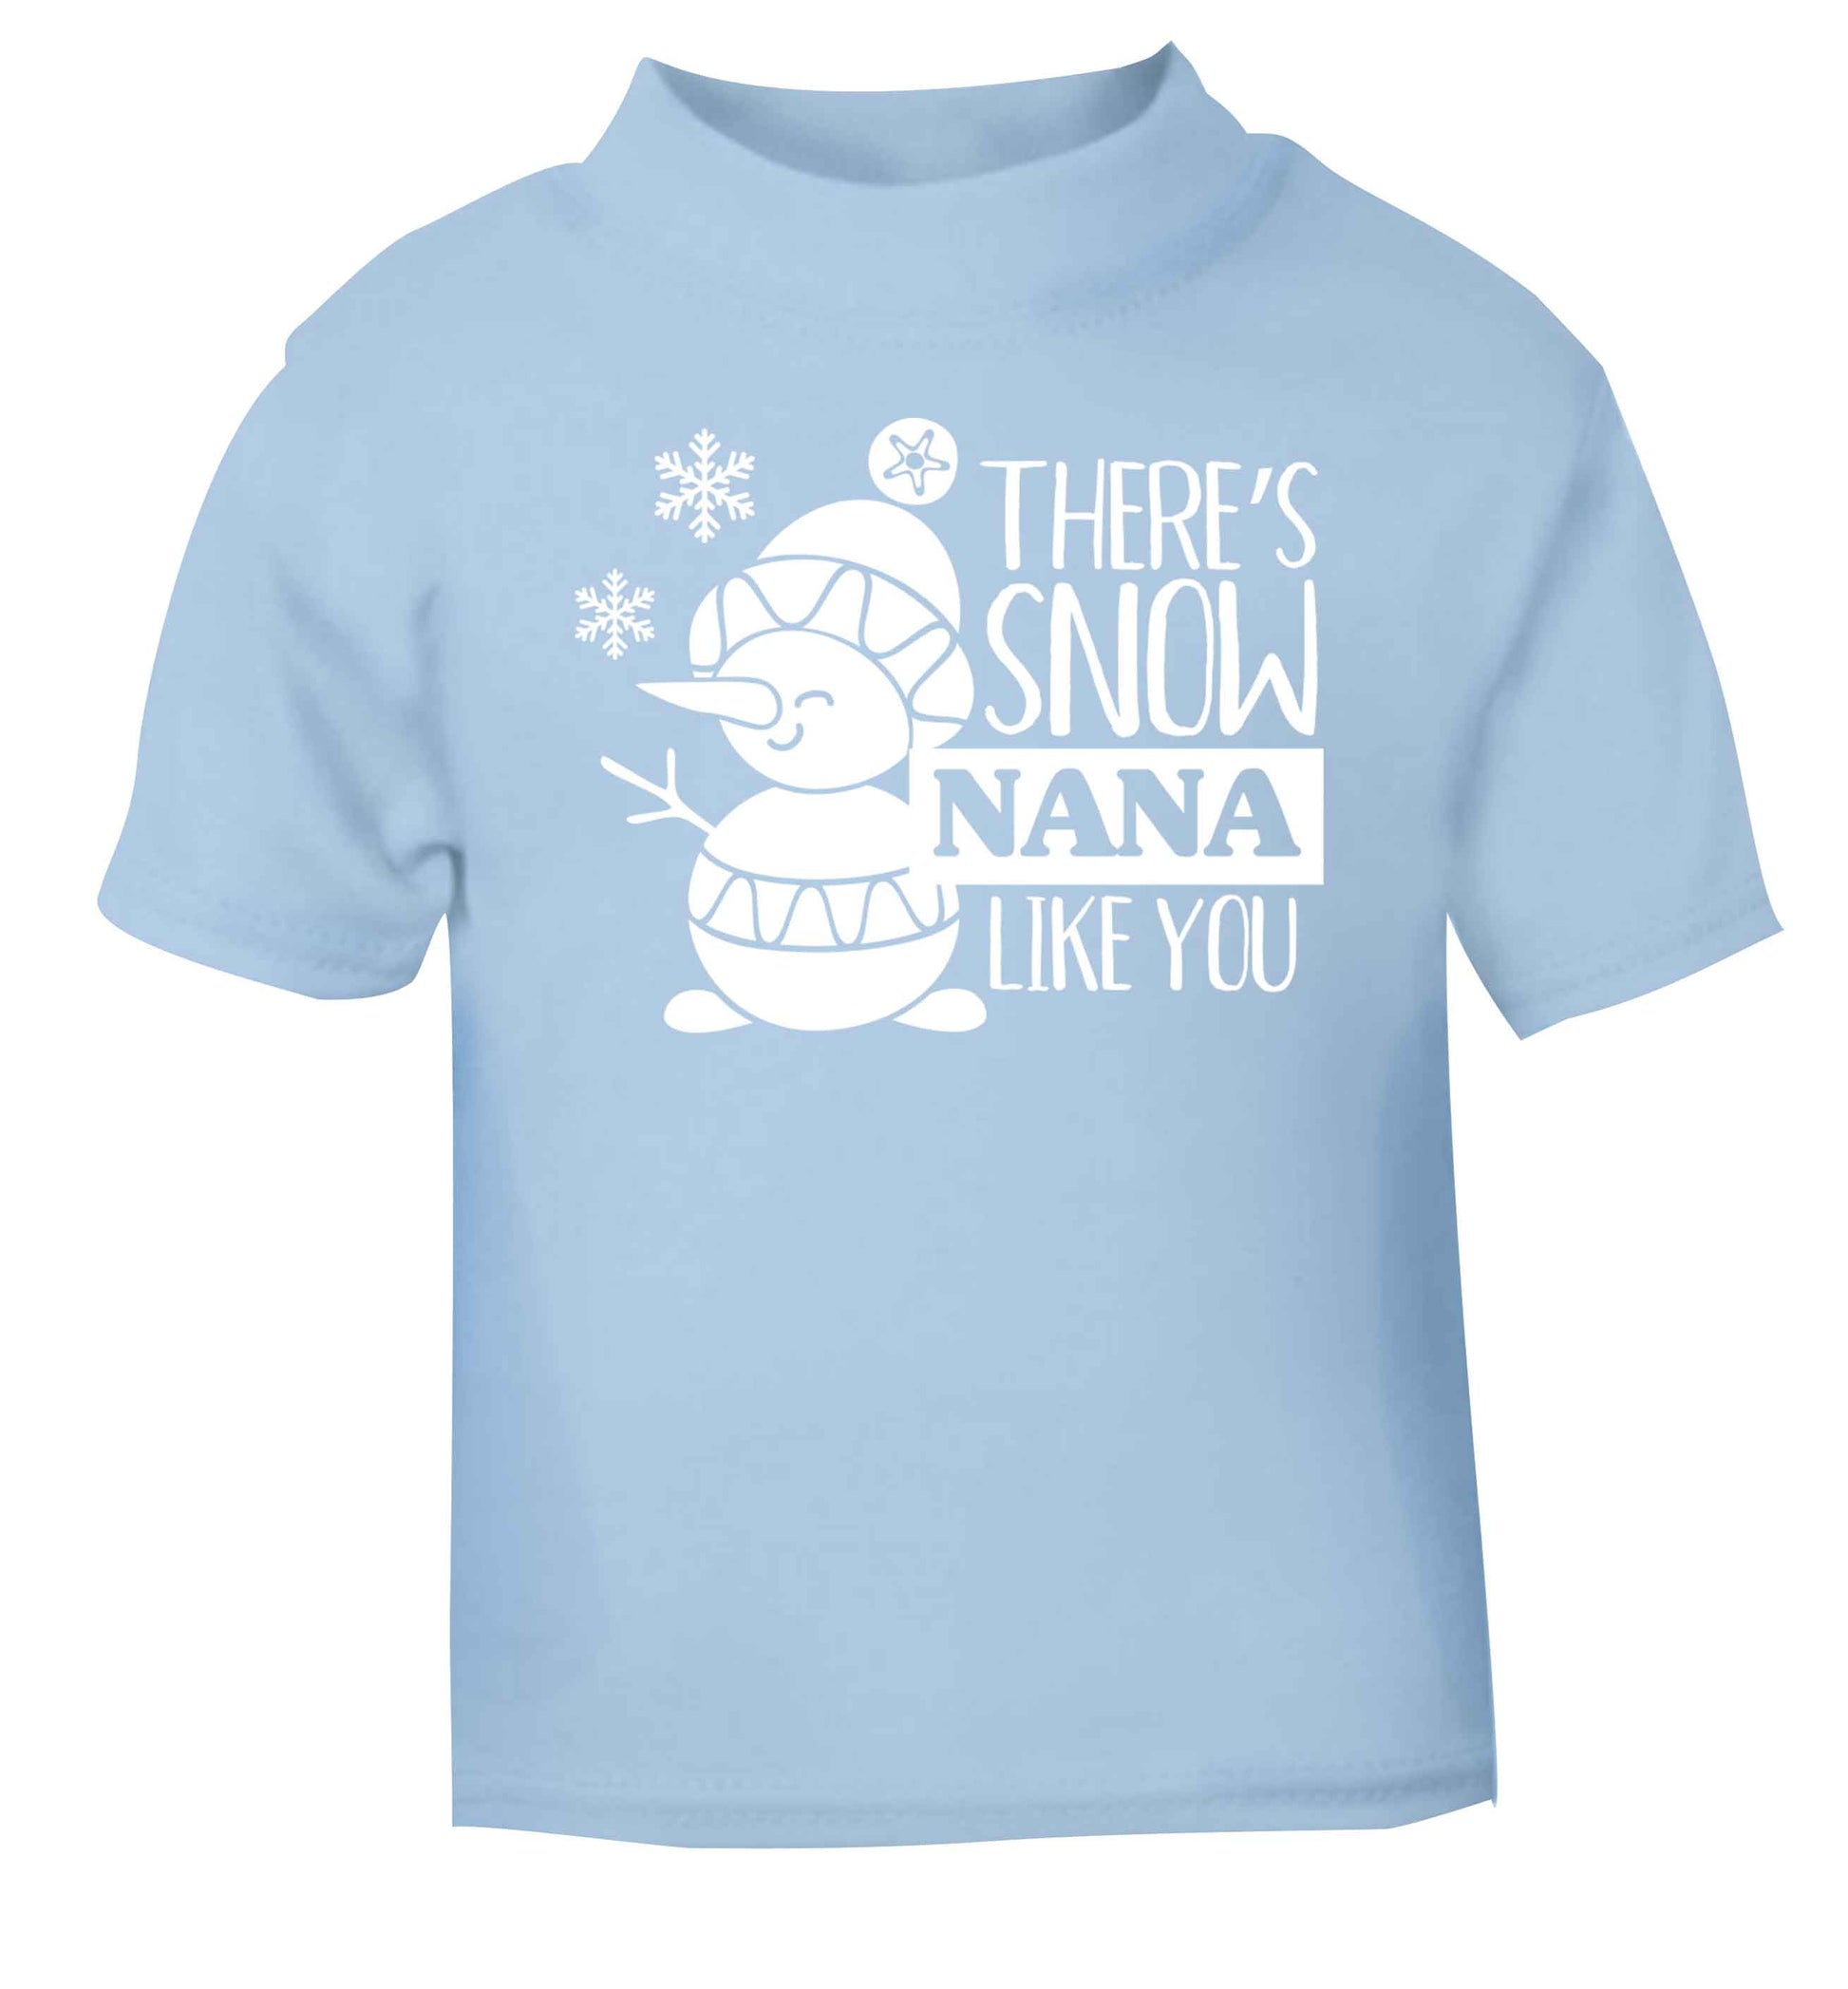 There's snow nana like you light blue baby toddler Tshirt 2 Years